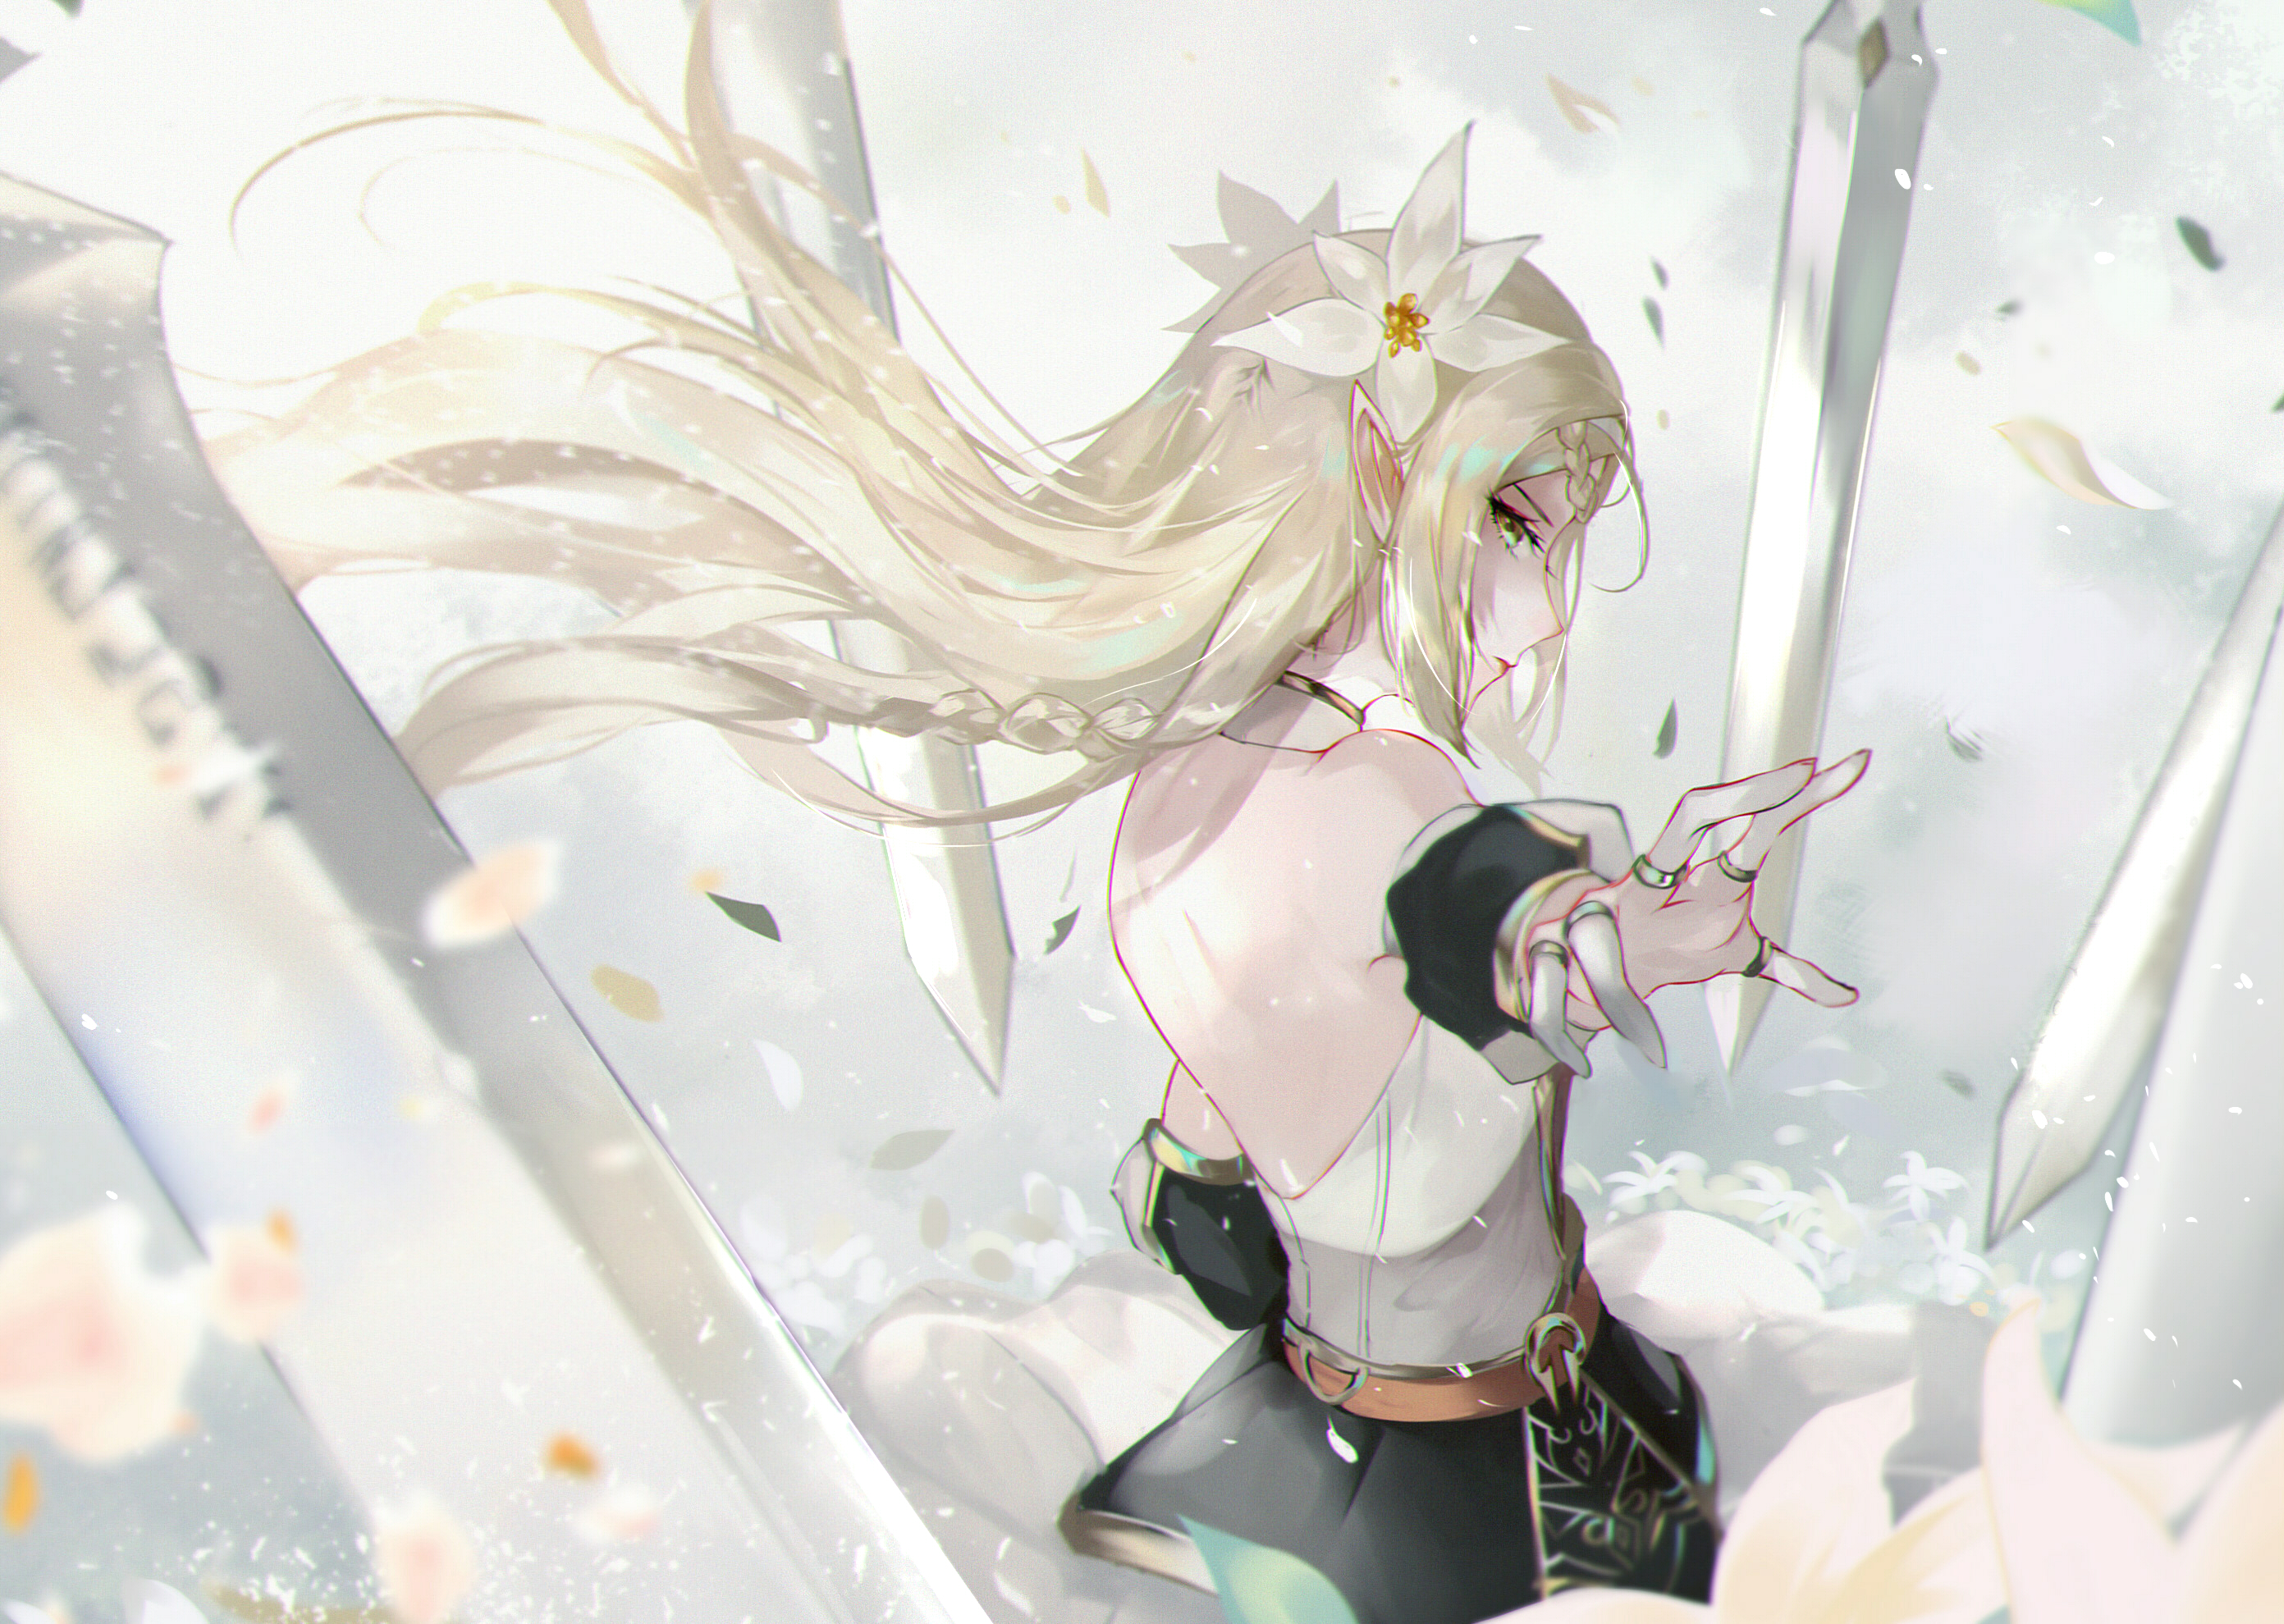 Epic Seven Anime Girls Elves Pointy Ears Women Fantasy Girl Blonde Long Hair Profile Looking At View 2783x1979